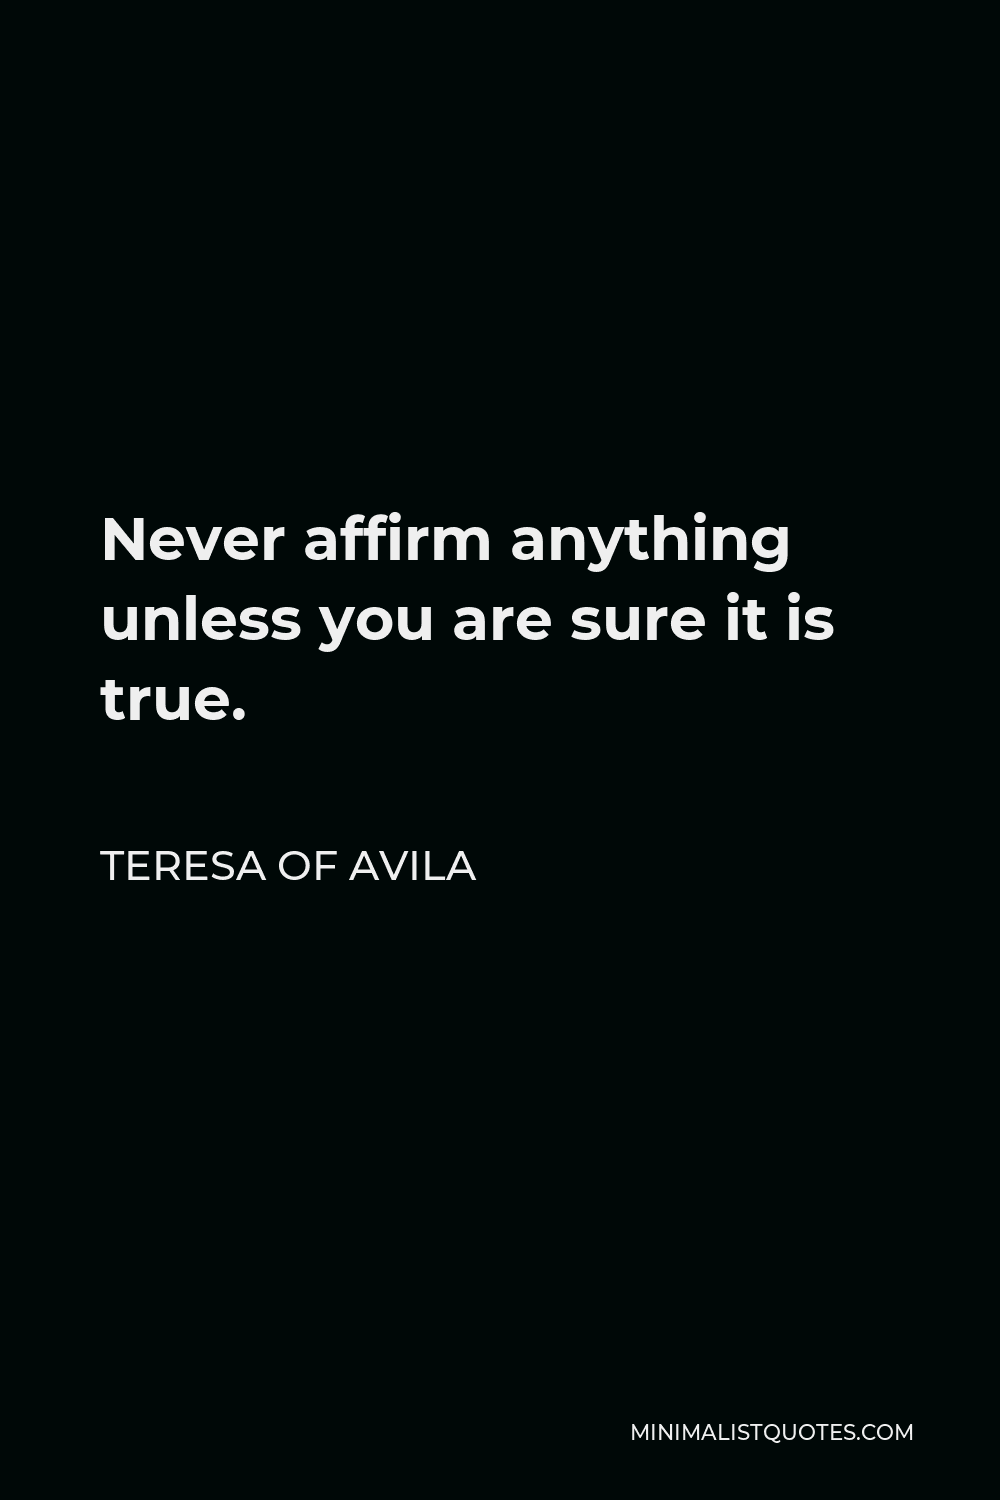 Teresa of Avila Quote - Never affirm anything unless you are sure it is true.